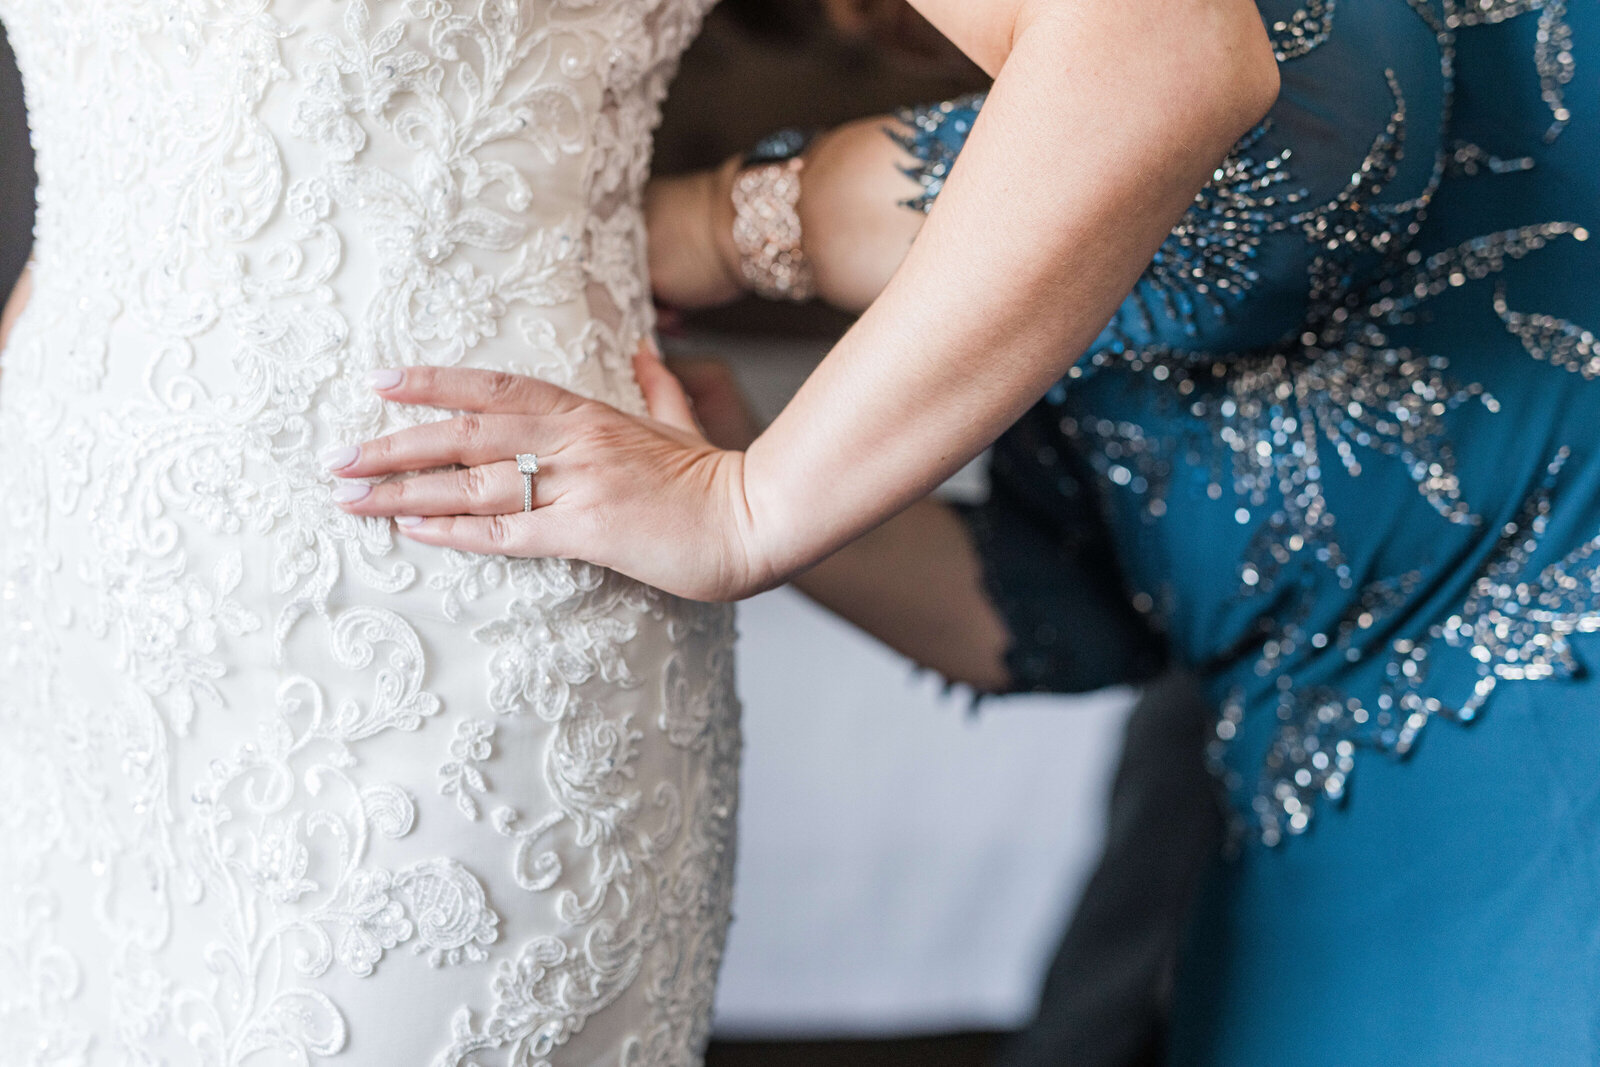 Up close photo of a bride's hand on her hip, with her ring up against dress as her mom, dressed in blue, zips her gown